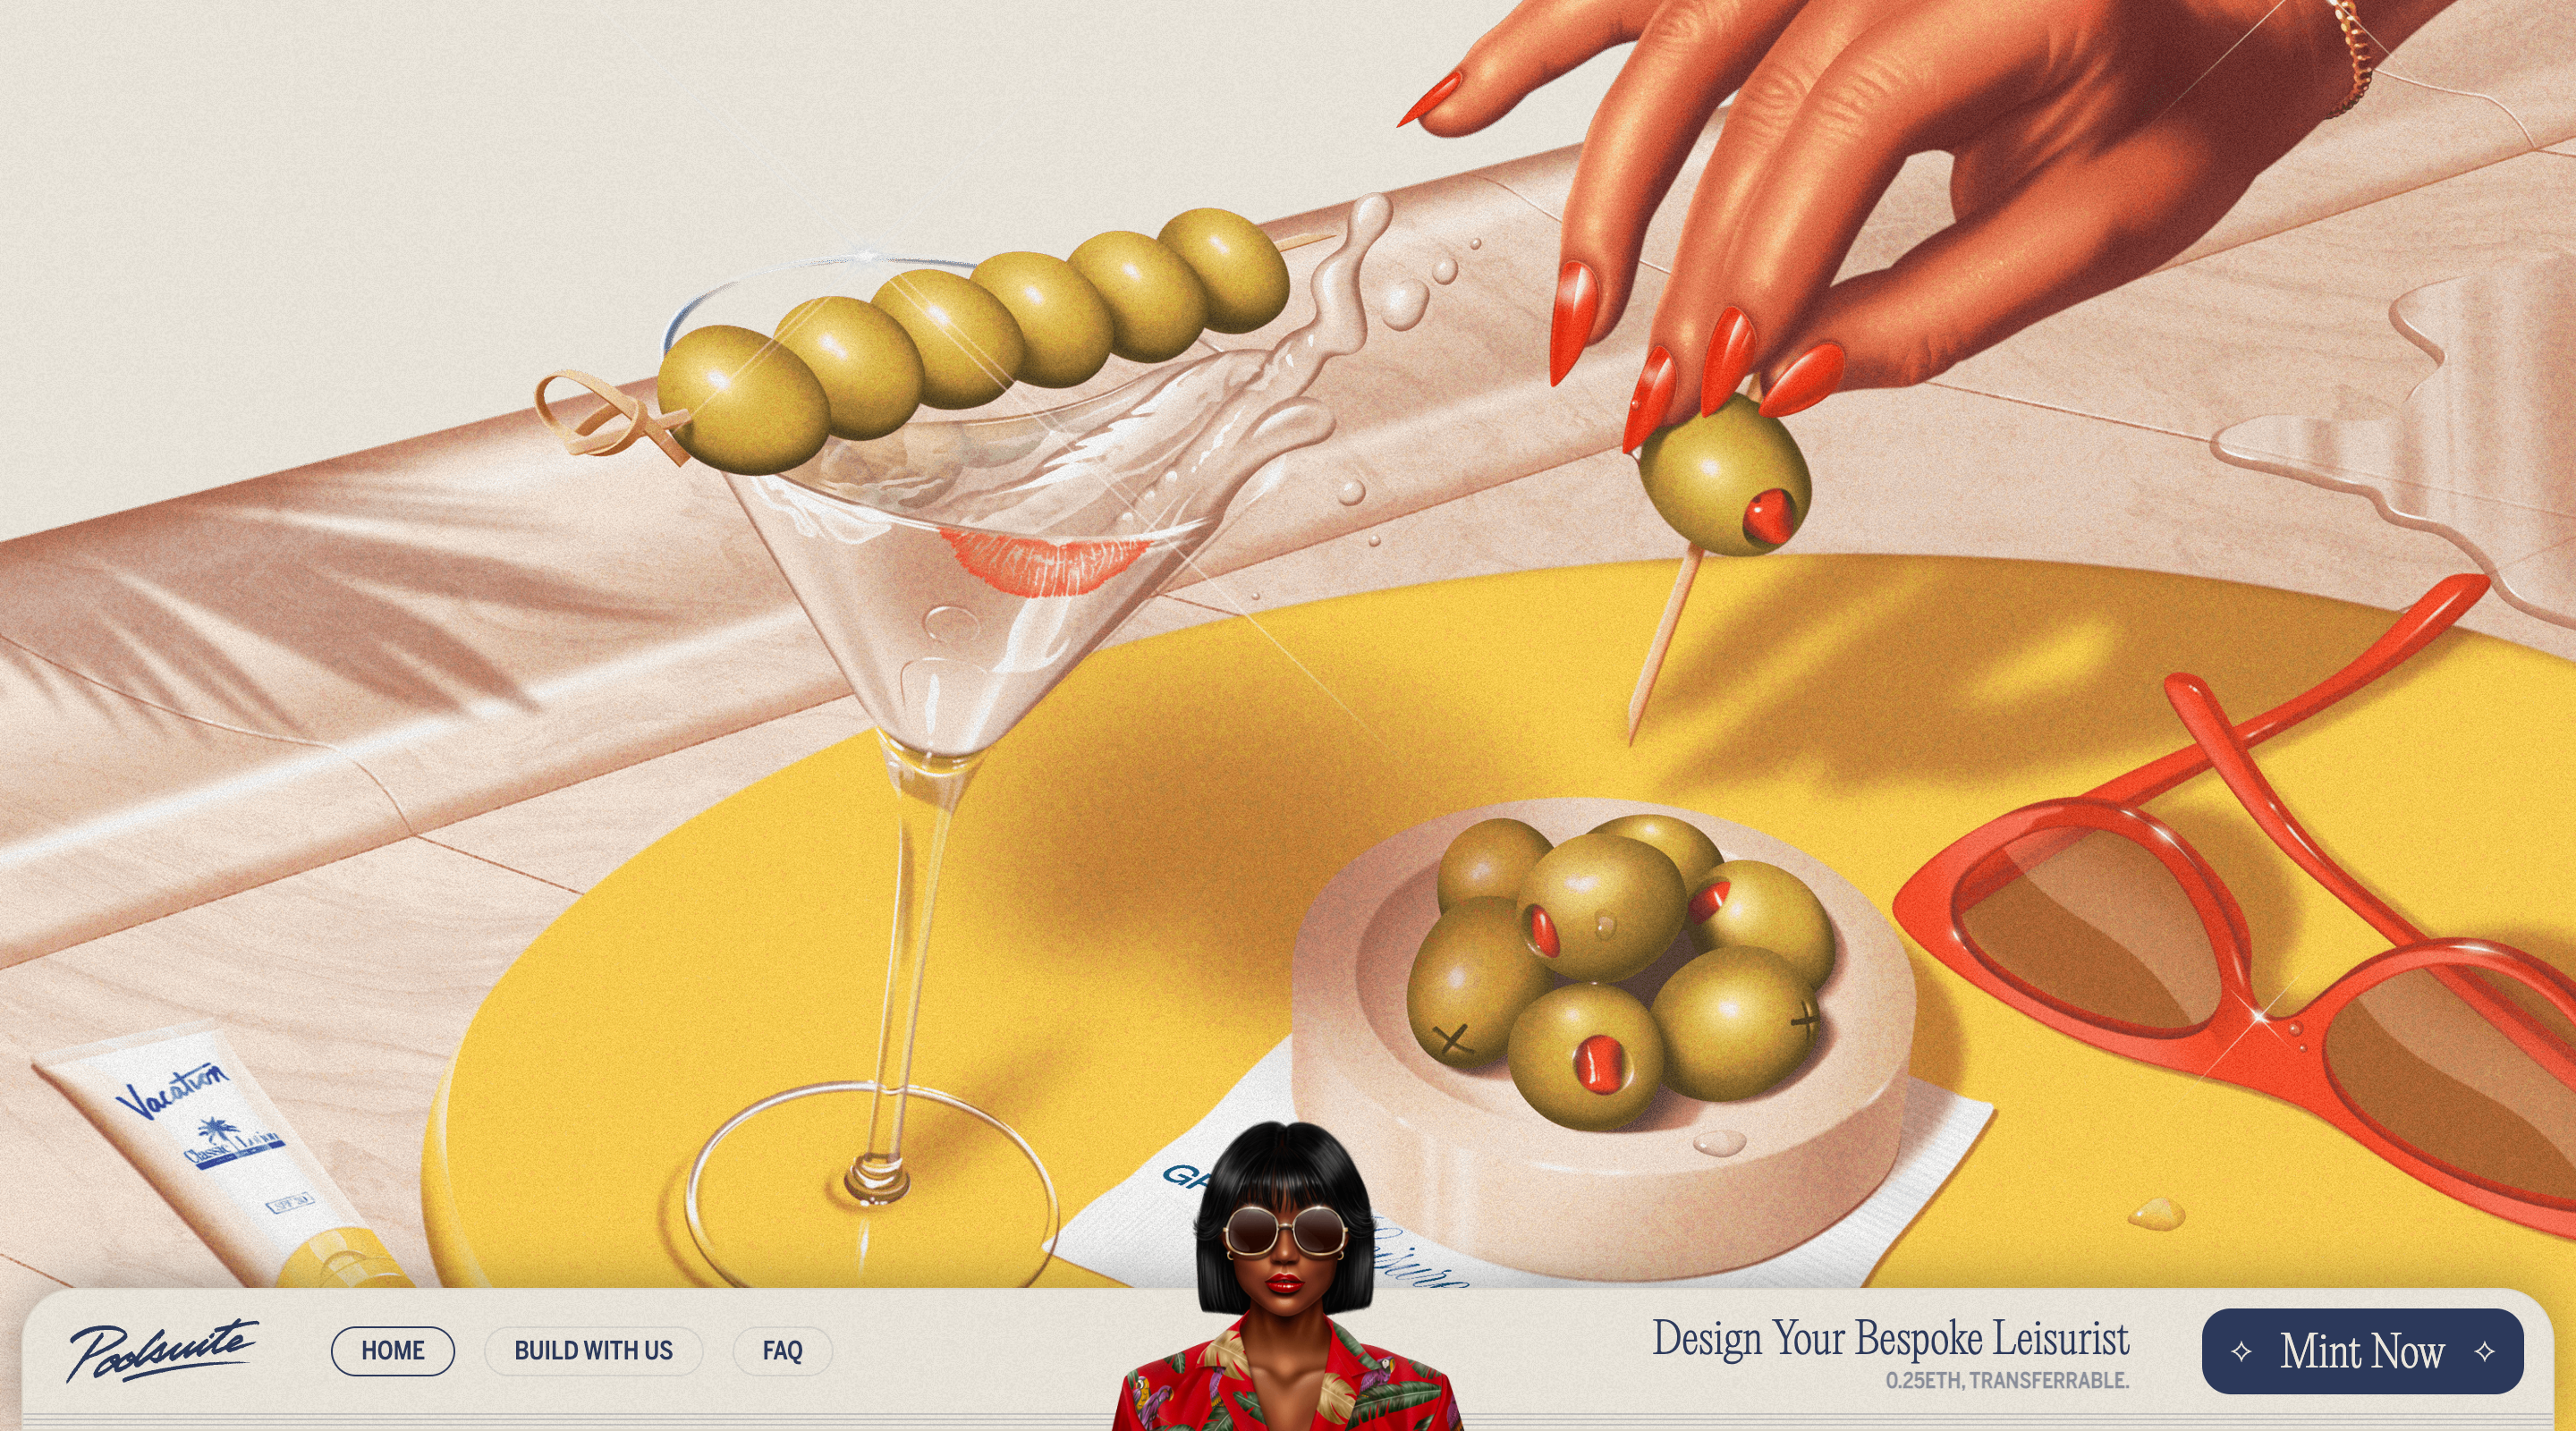 Screenshot of the Poolsuite Grand Leisure website. The entire page is cover with a detailed 90s-style illustration of a martini and a pile of green olives. At the bottom of the screen is a fixed navigation overlay that lists three page links in a row on the left side. In the middle of the overlay is an illustration of a rich person, and on the right is a large 'Mint Now' call-to-action button.